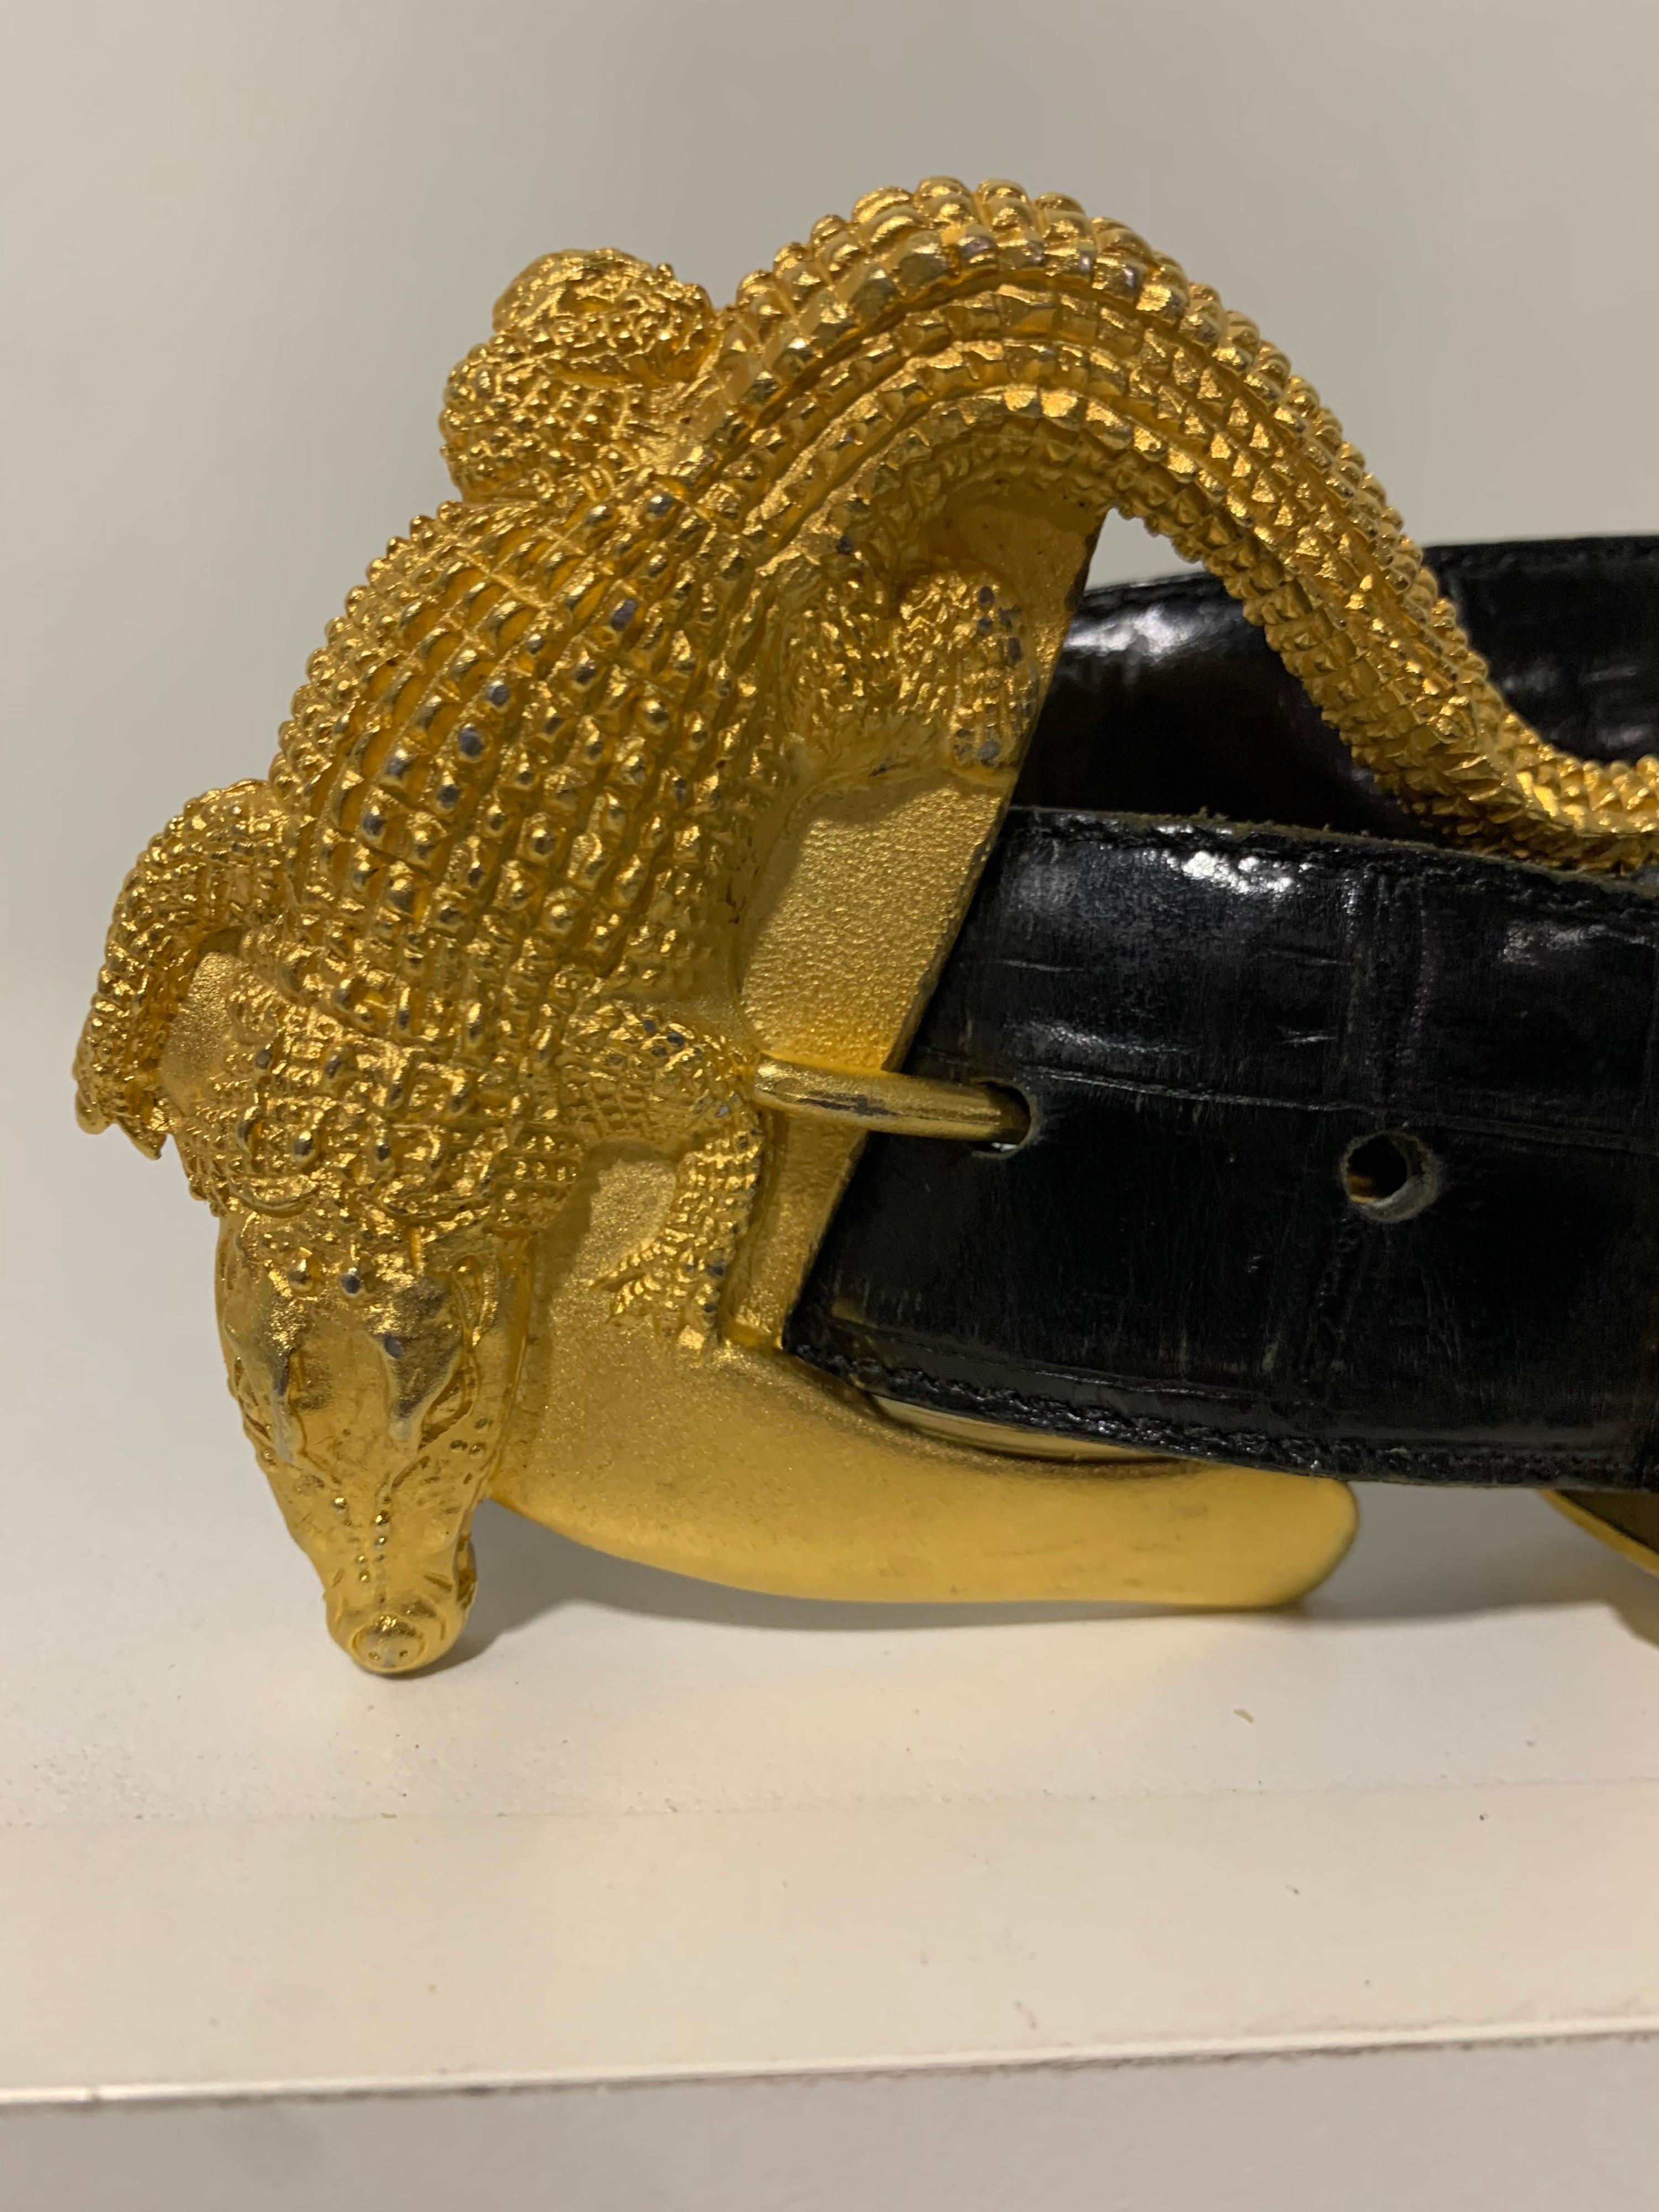 1980s Hartnell black crocodile-embossed leather belt with gold-tone 3-dimensional alligator sculptural buckle and tip cover. Marked size XL. 